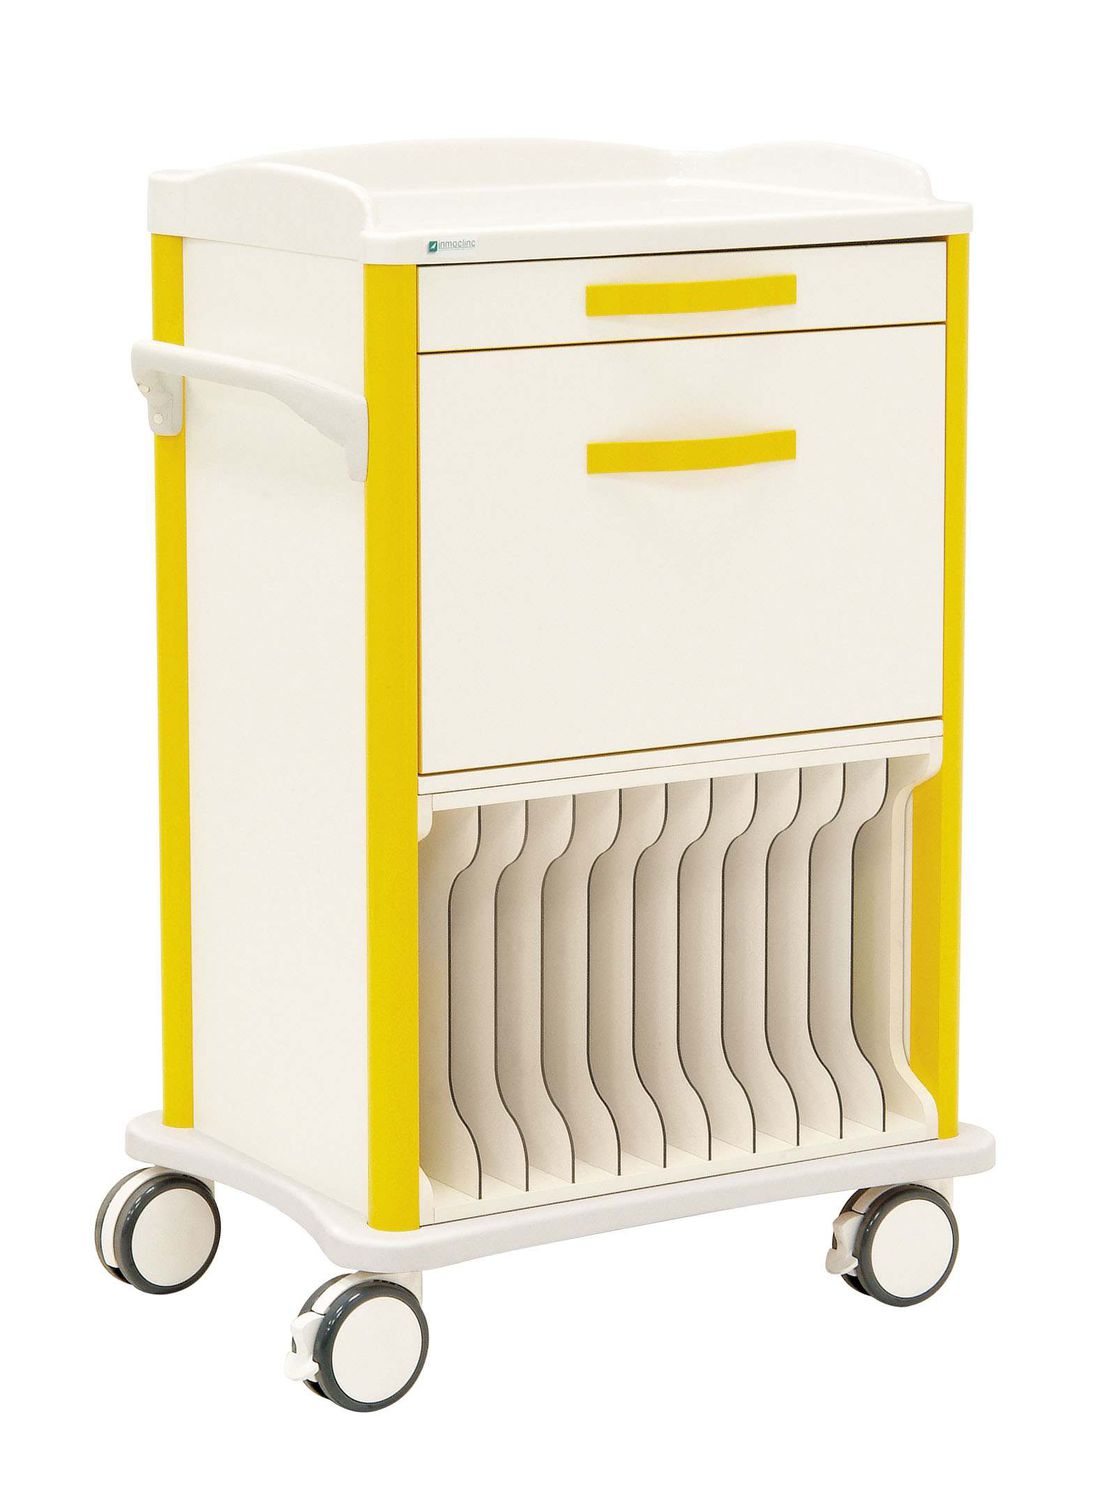 X-ray record trolley / with drawer / horizontal-access 50220 Inmoclinc